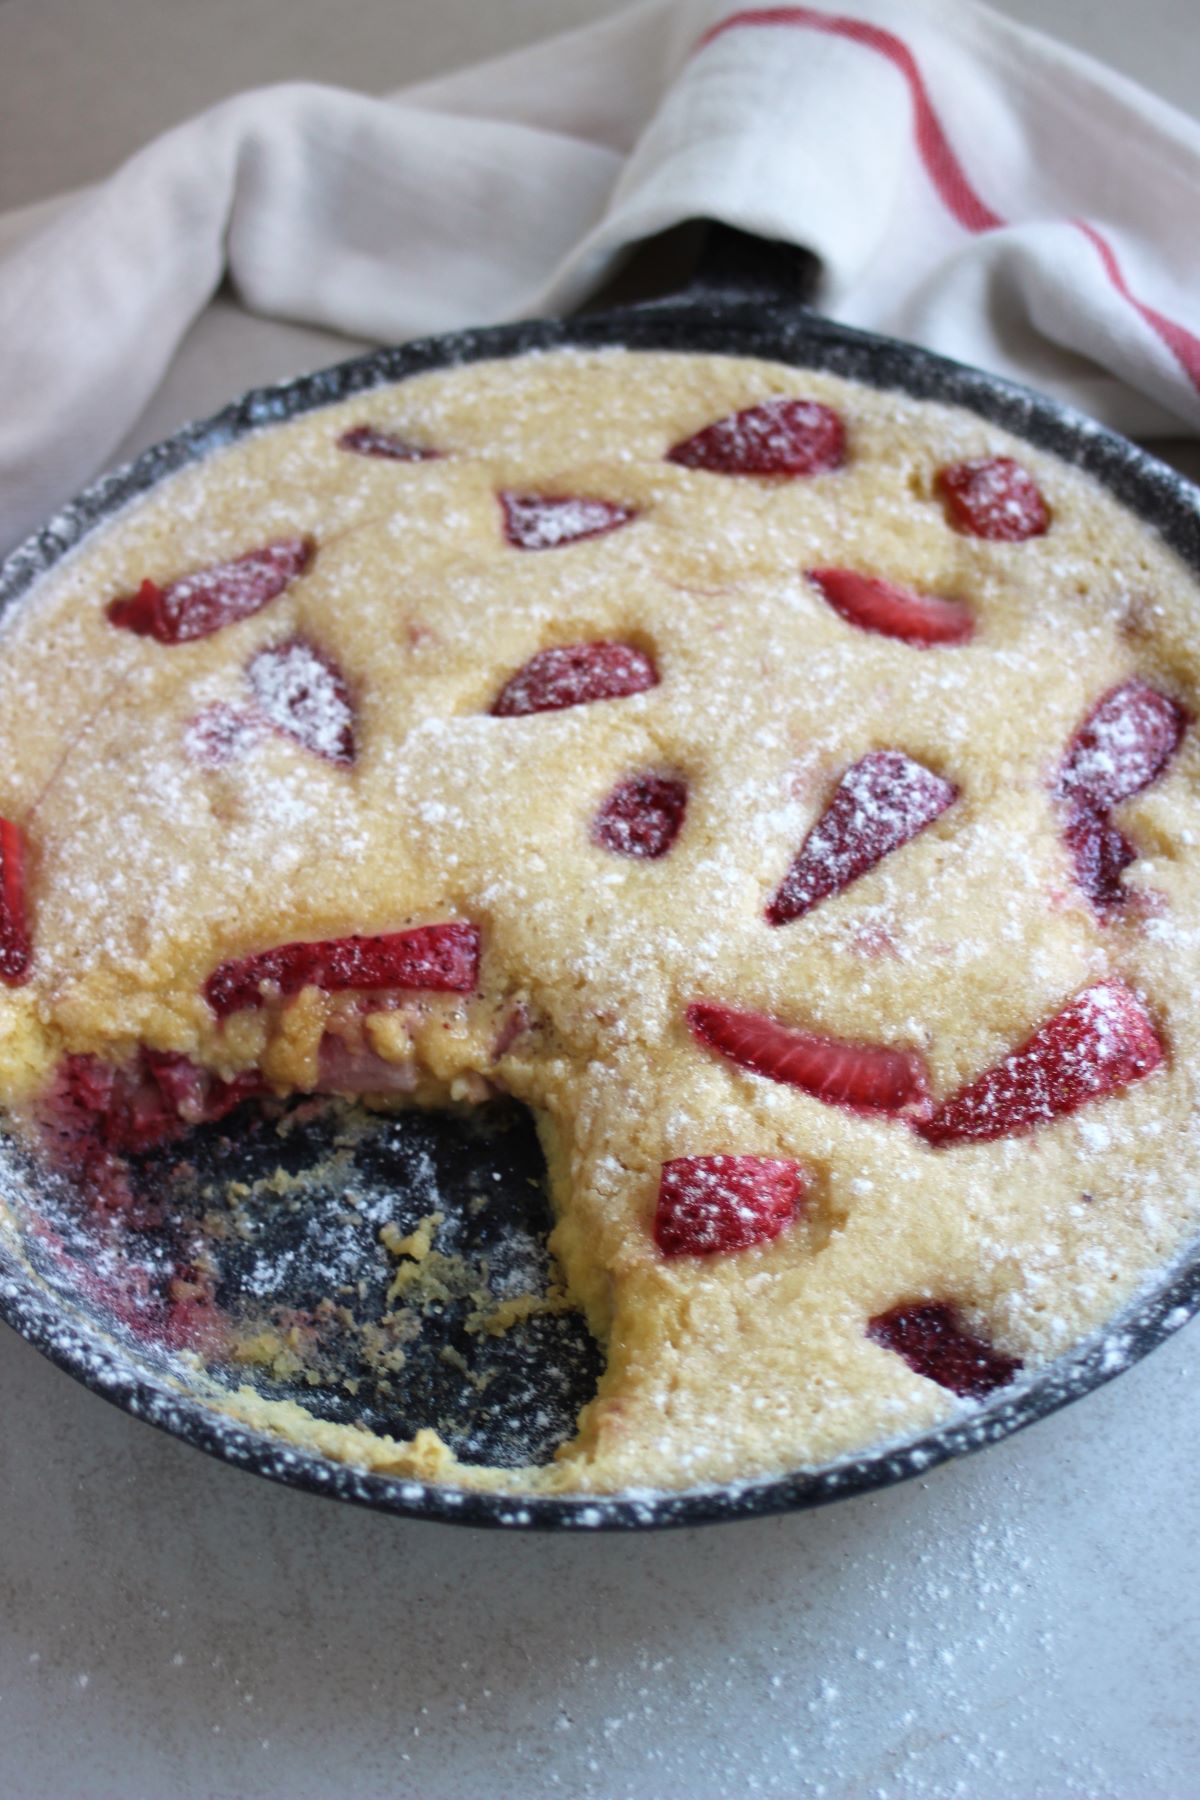 Strawberry clafoutis, without a piece, in a black skillet.